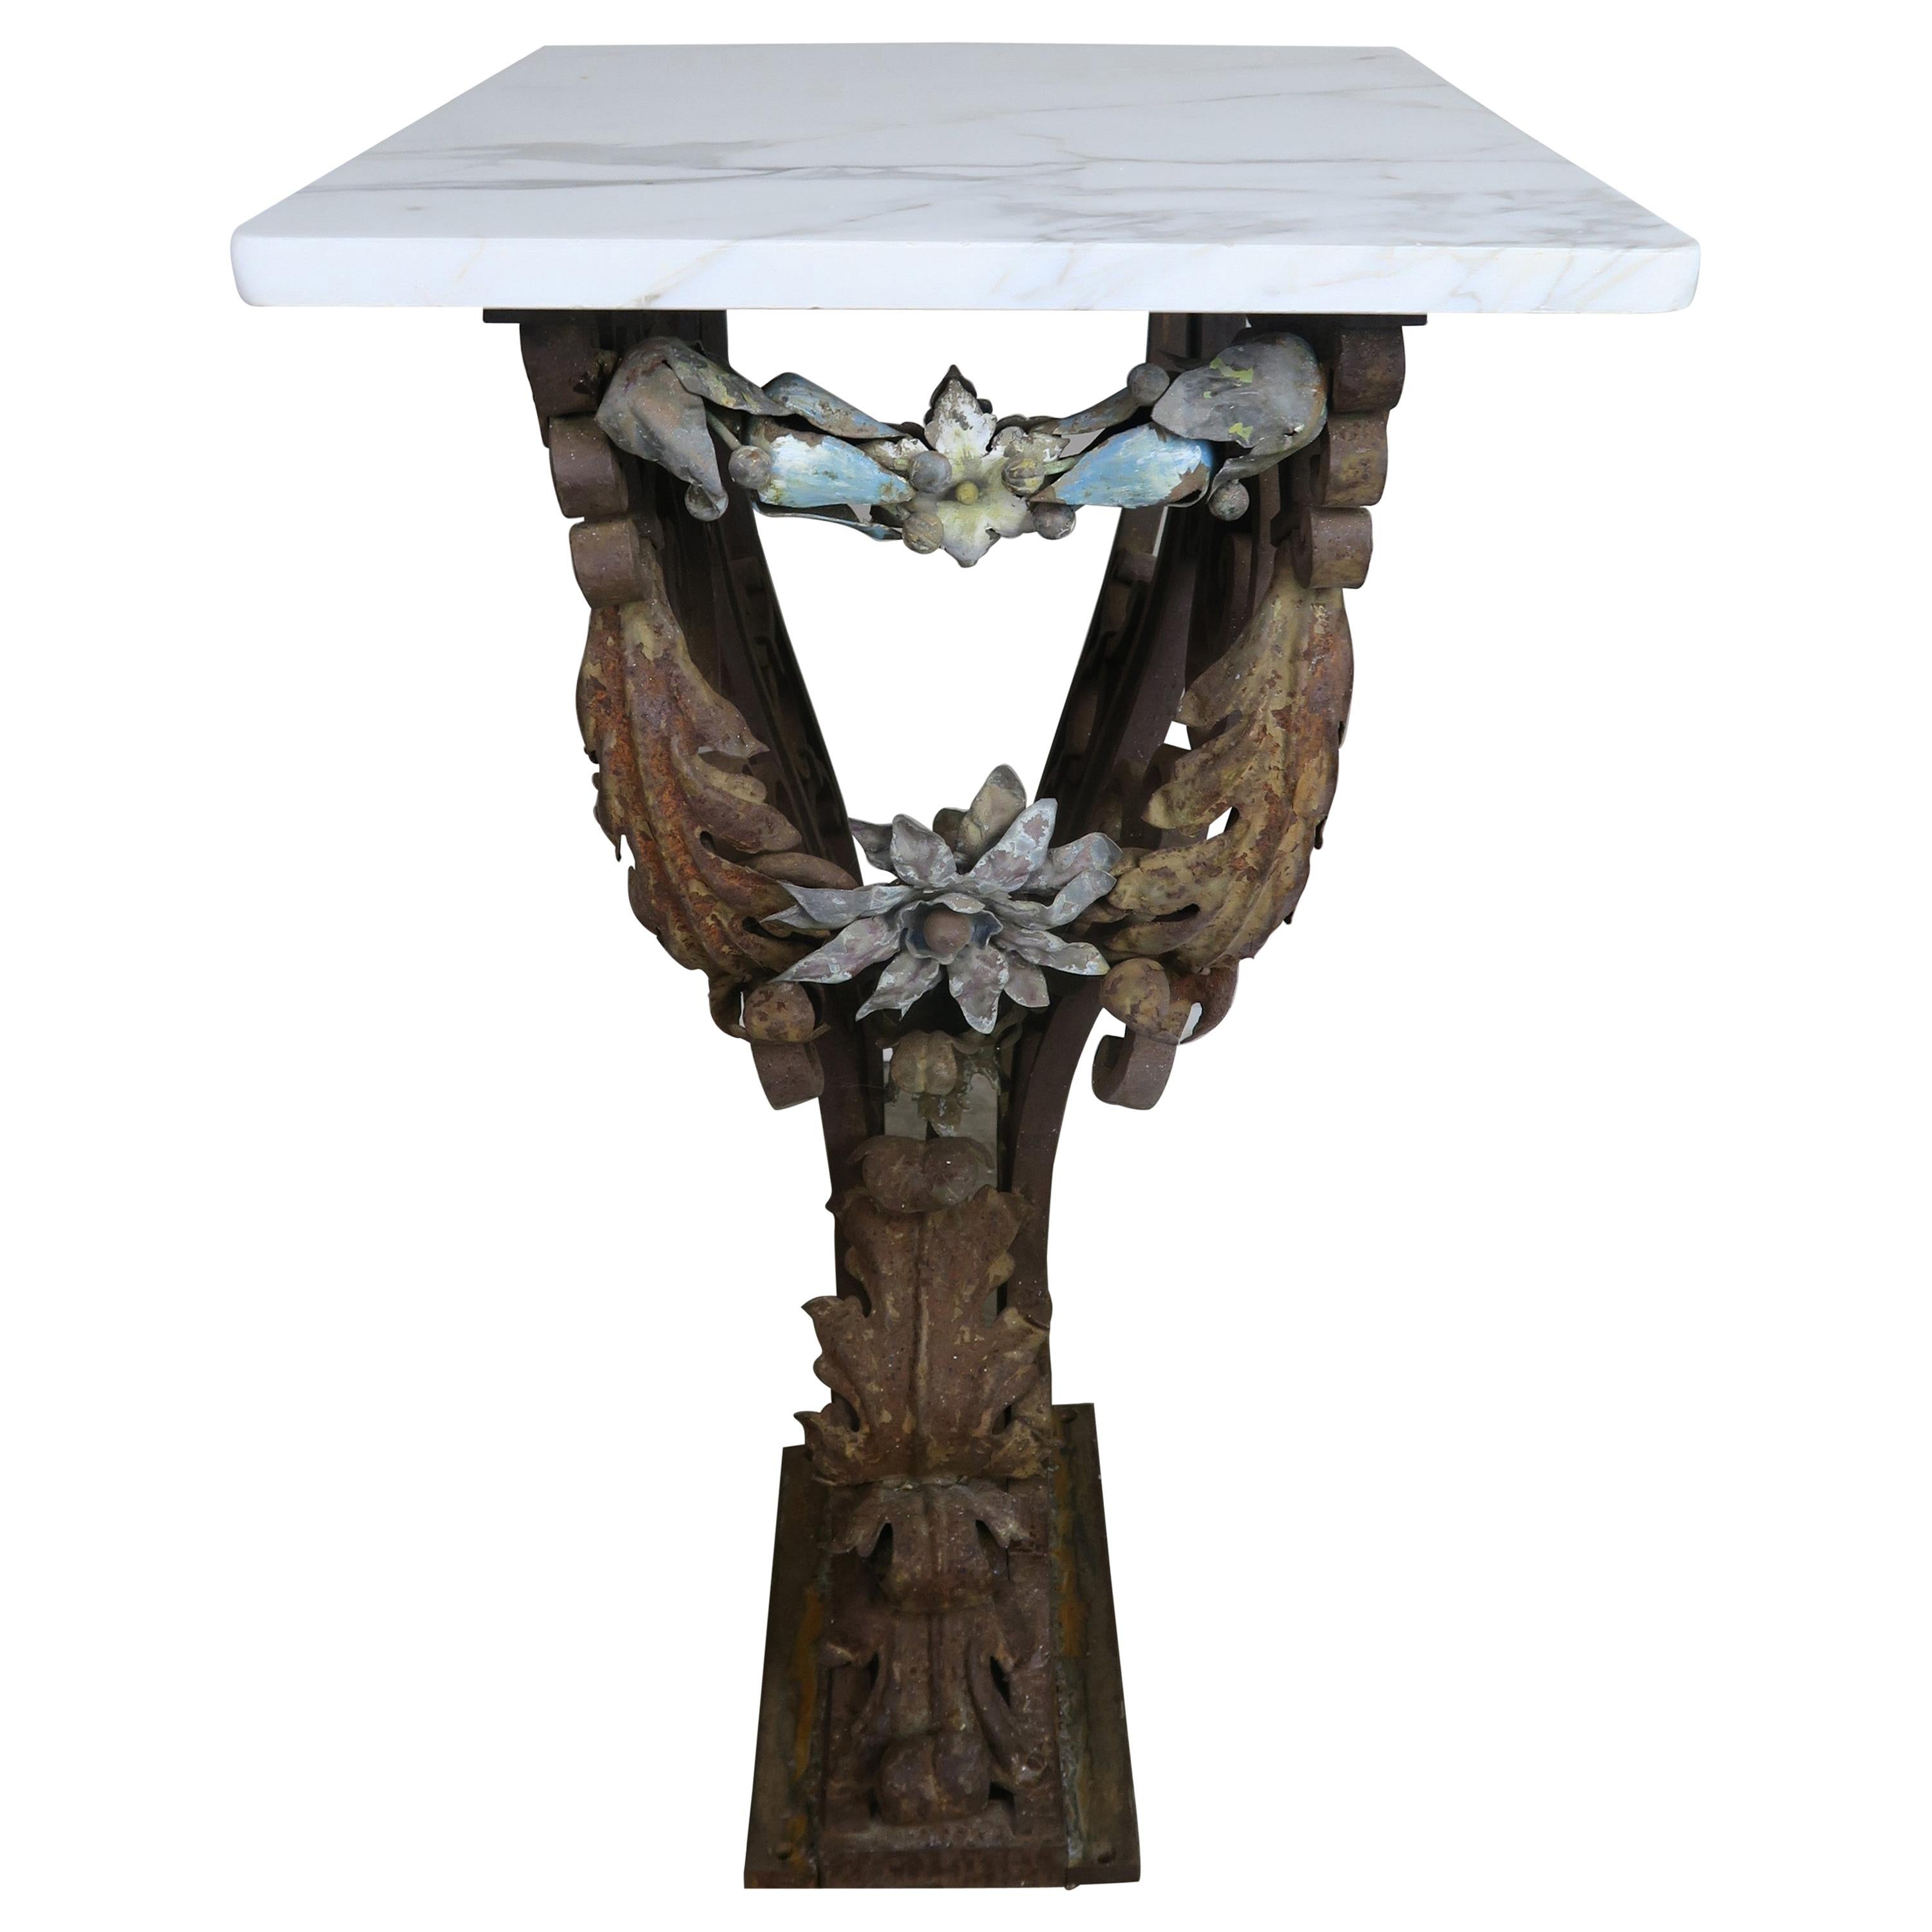 19th Century Italian Painted Wrought Iron Table with Carrara Marble Top